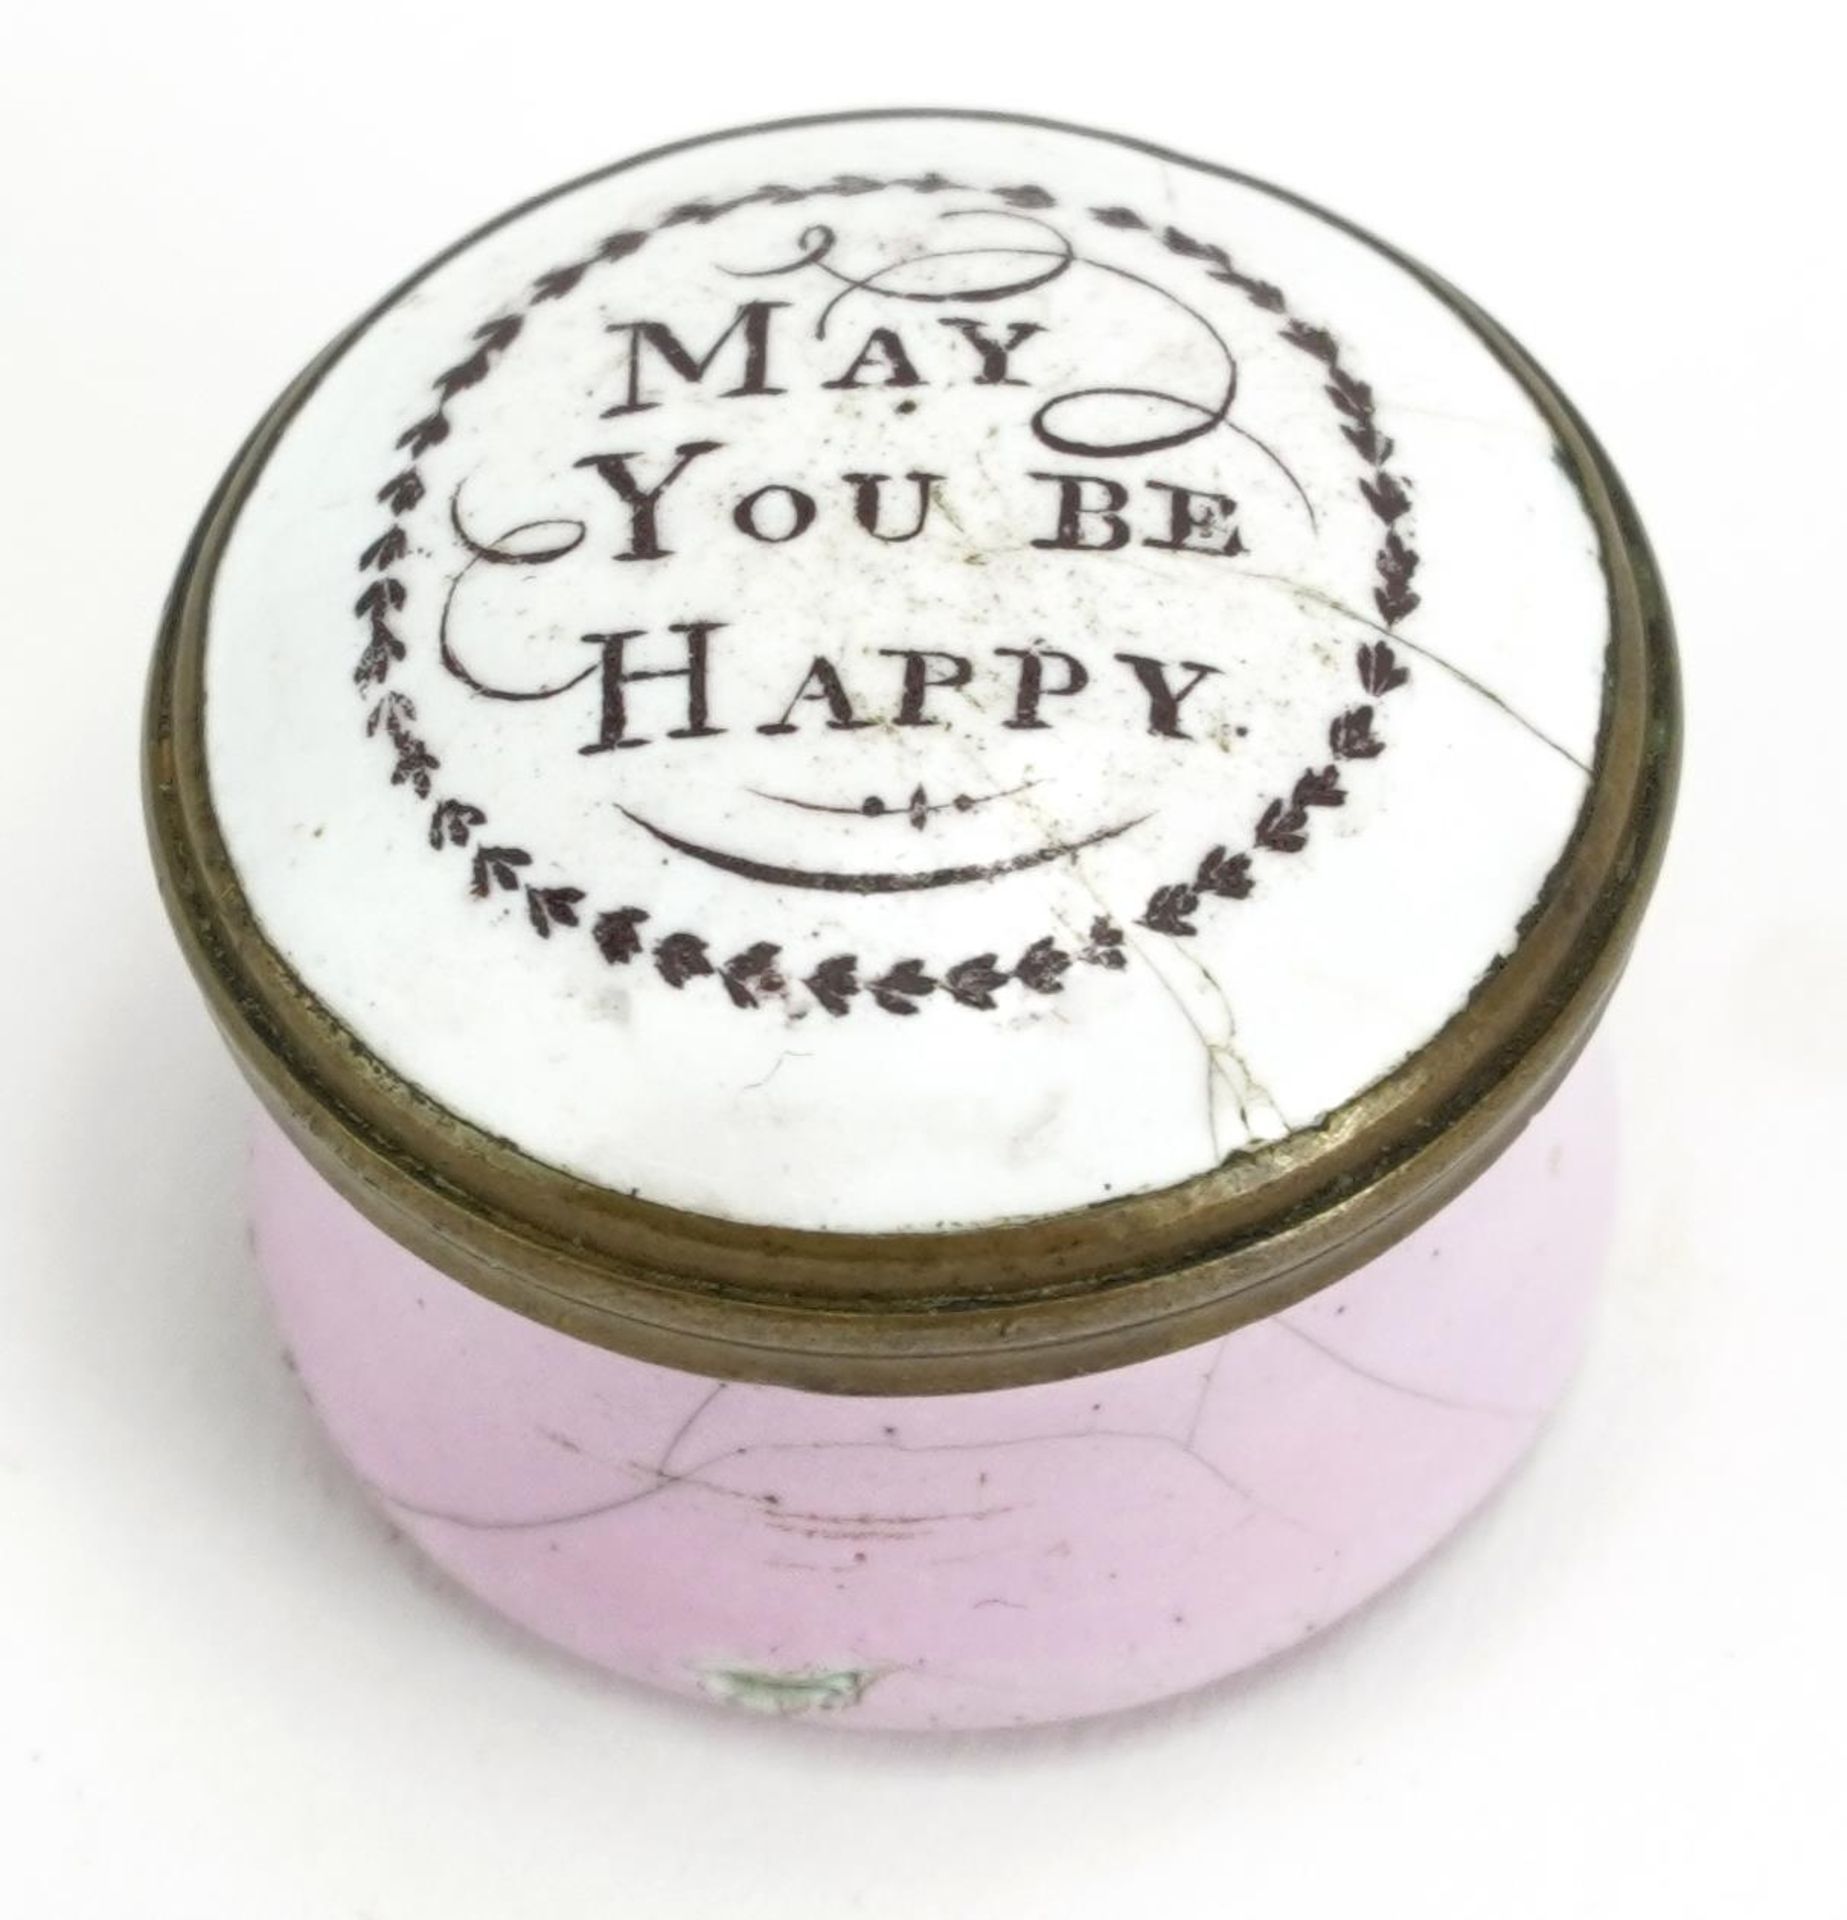 18th century Bilston enamel patch box with inscribed motto May you be happy, 2.0cm in diameter : For